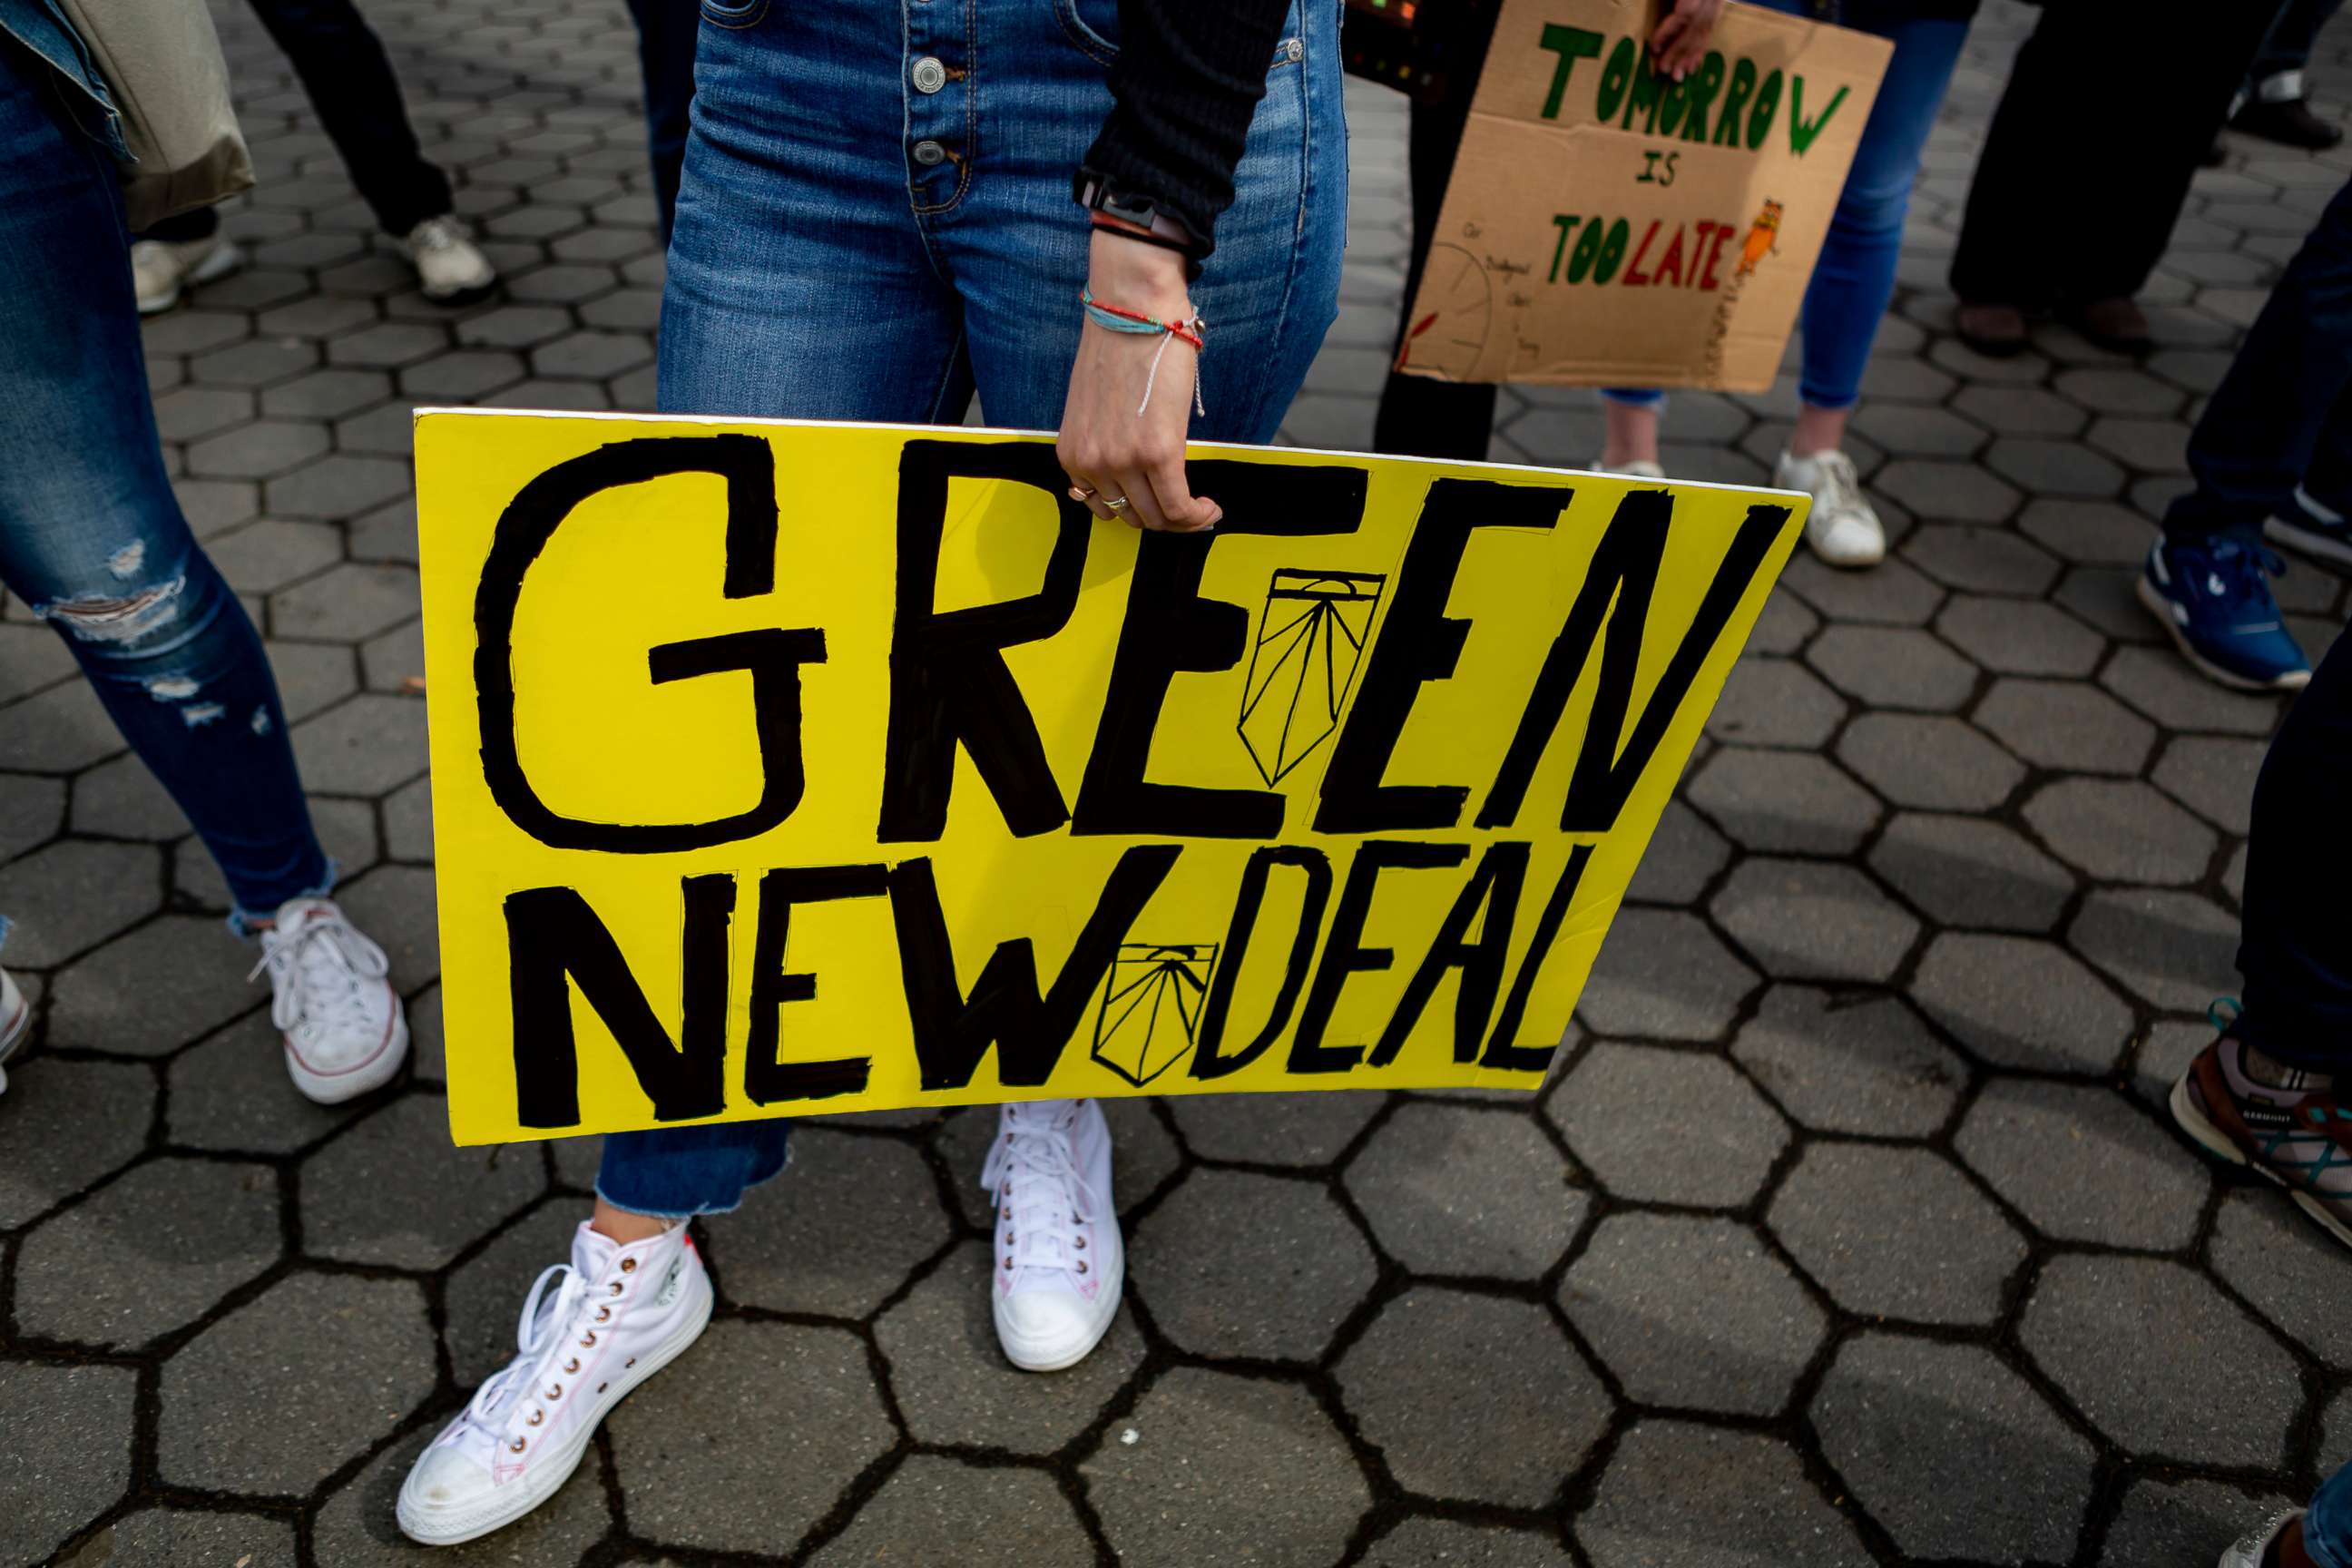 PHOTO: On March 15, 2019, thousands of students from New York City and around the world walked out of class Friday to protest the lack of action to protect the earth from catastrophic climate change.